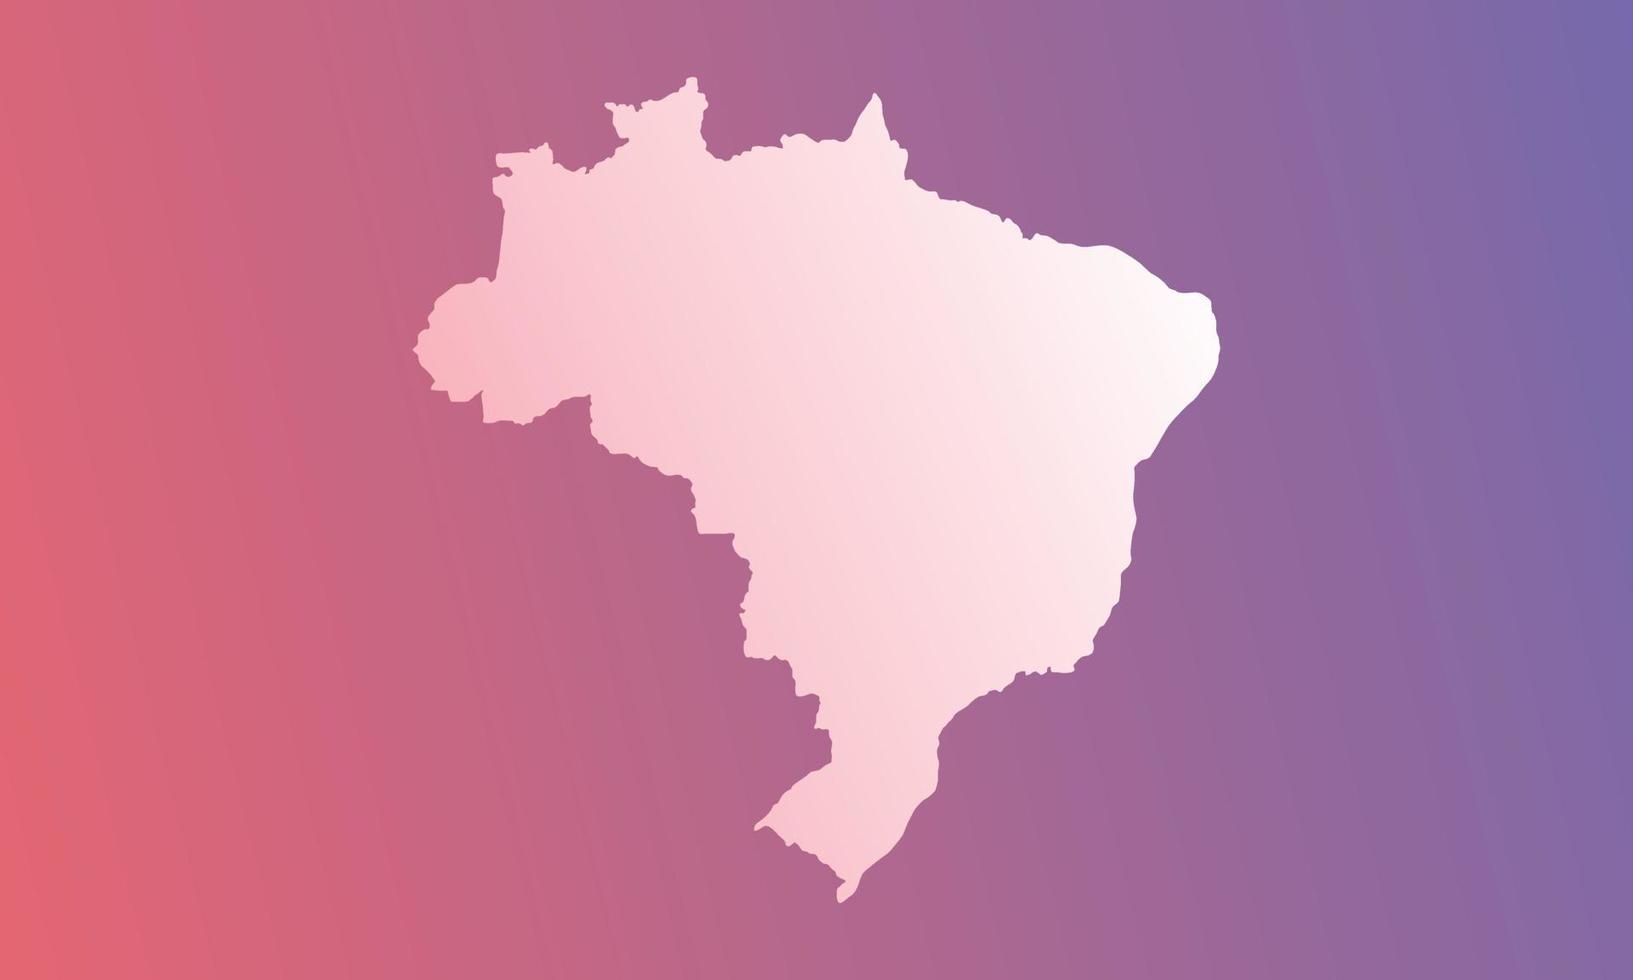 Brazil background with red and purple gradient vector